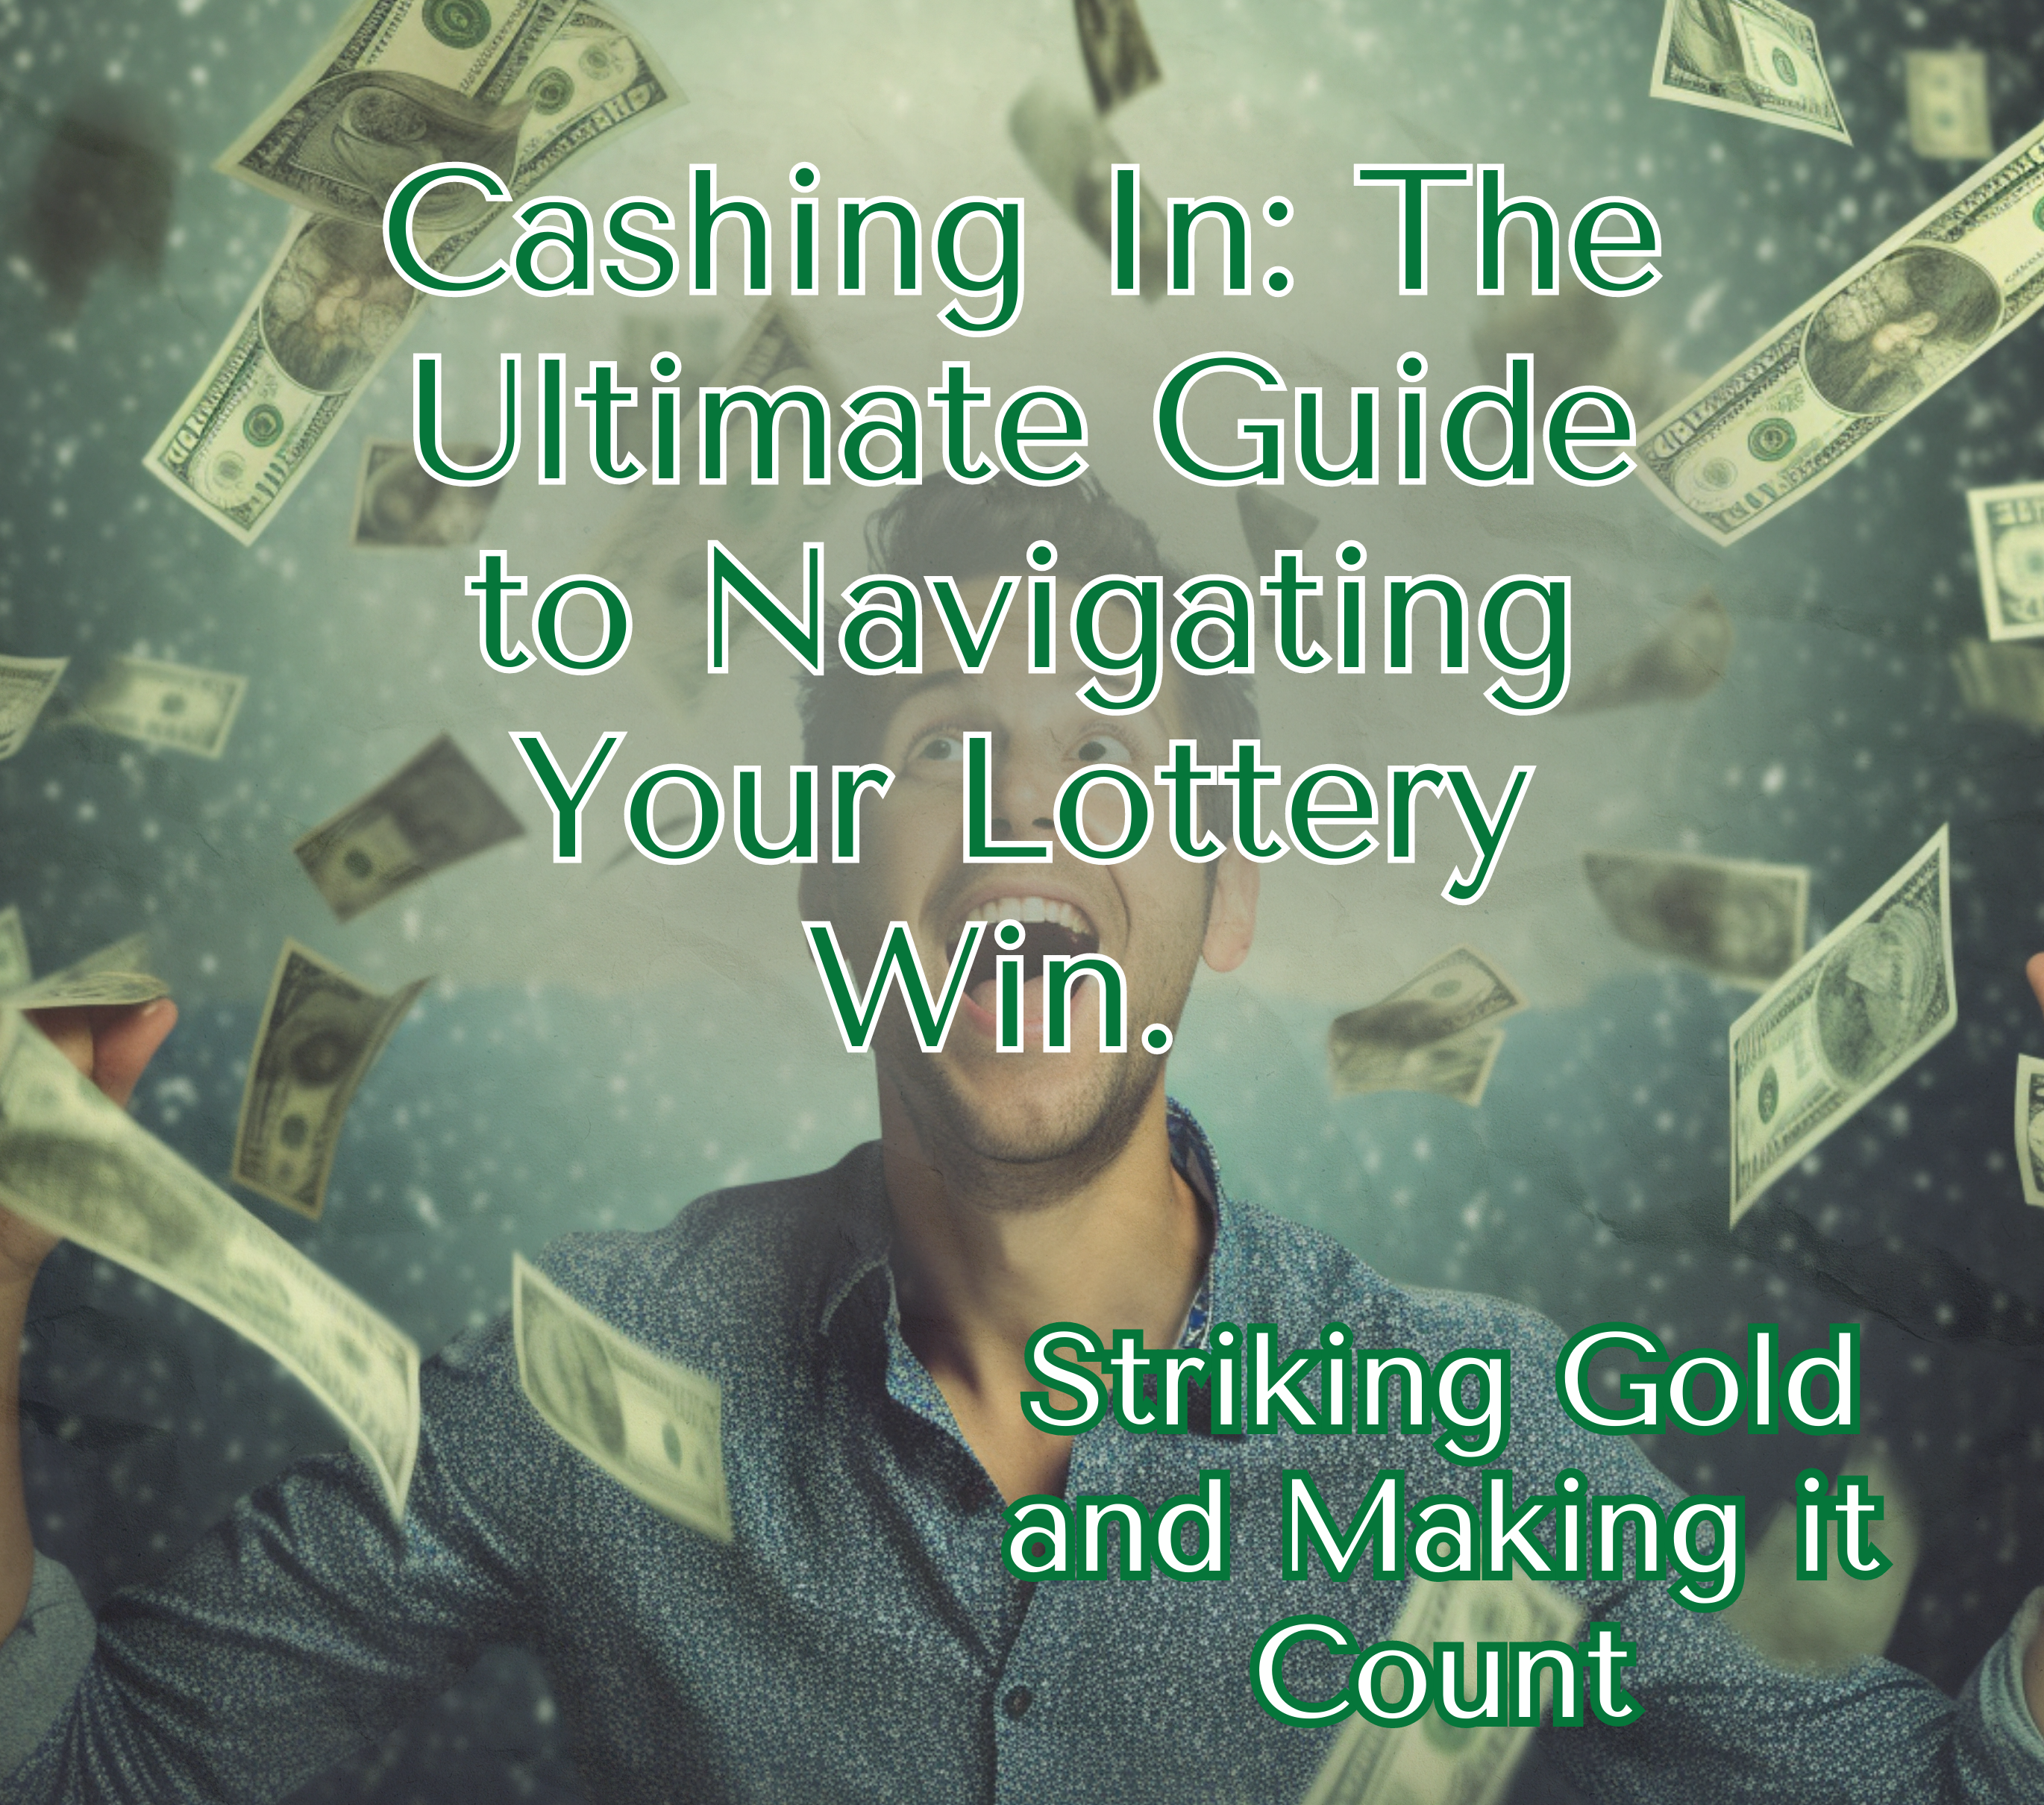 The Ultimate Guide to Navigating Your Lottery Win.